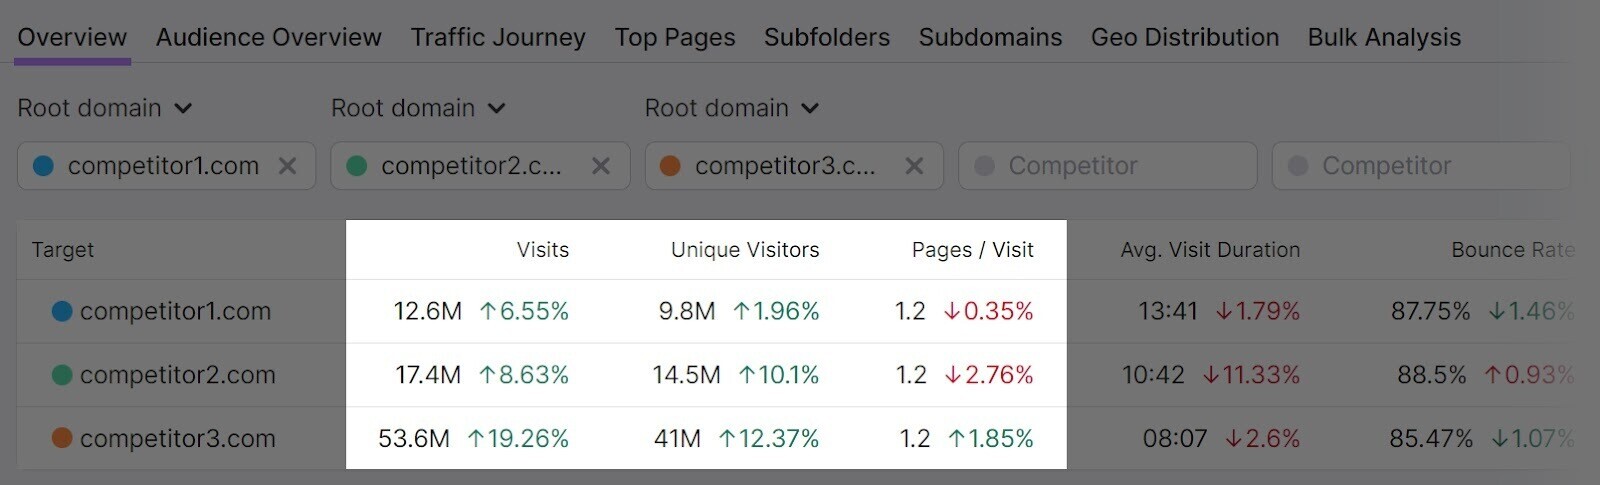 Traffic Analytics provides information on your competitors’ visits, unique visitors (users), and pages / visit